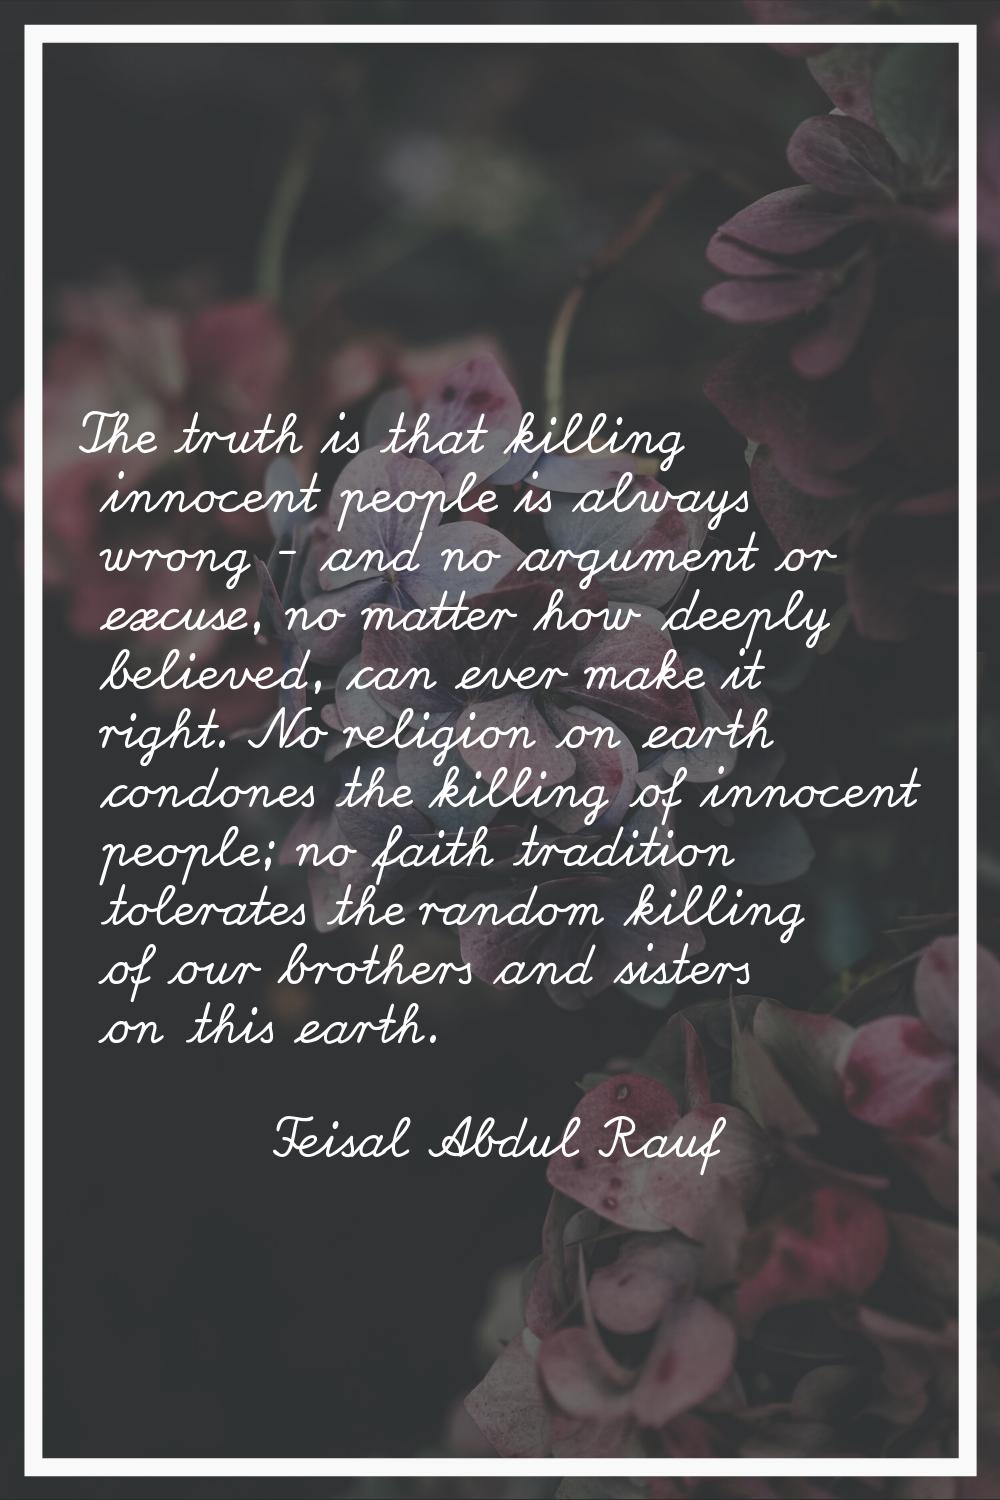 The truth is that killing innocent people is always wrong - and no argument or excuse, no matter ho